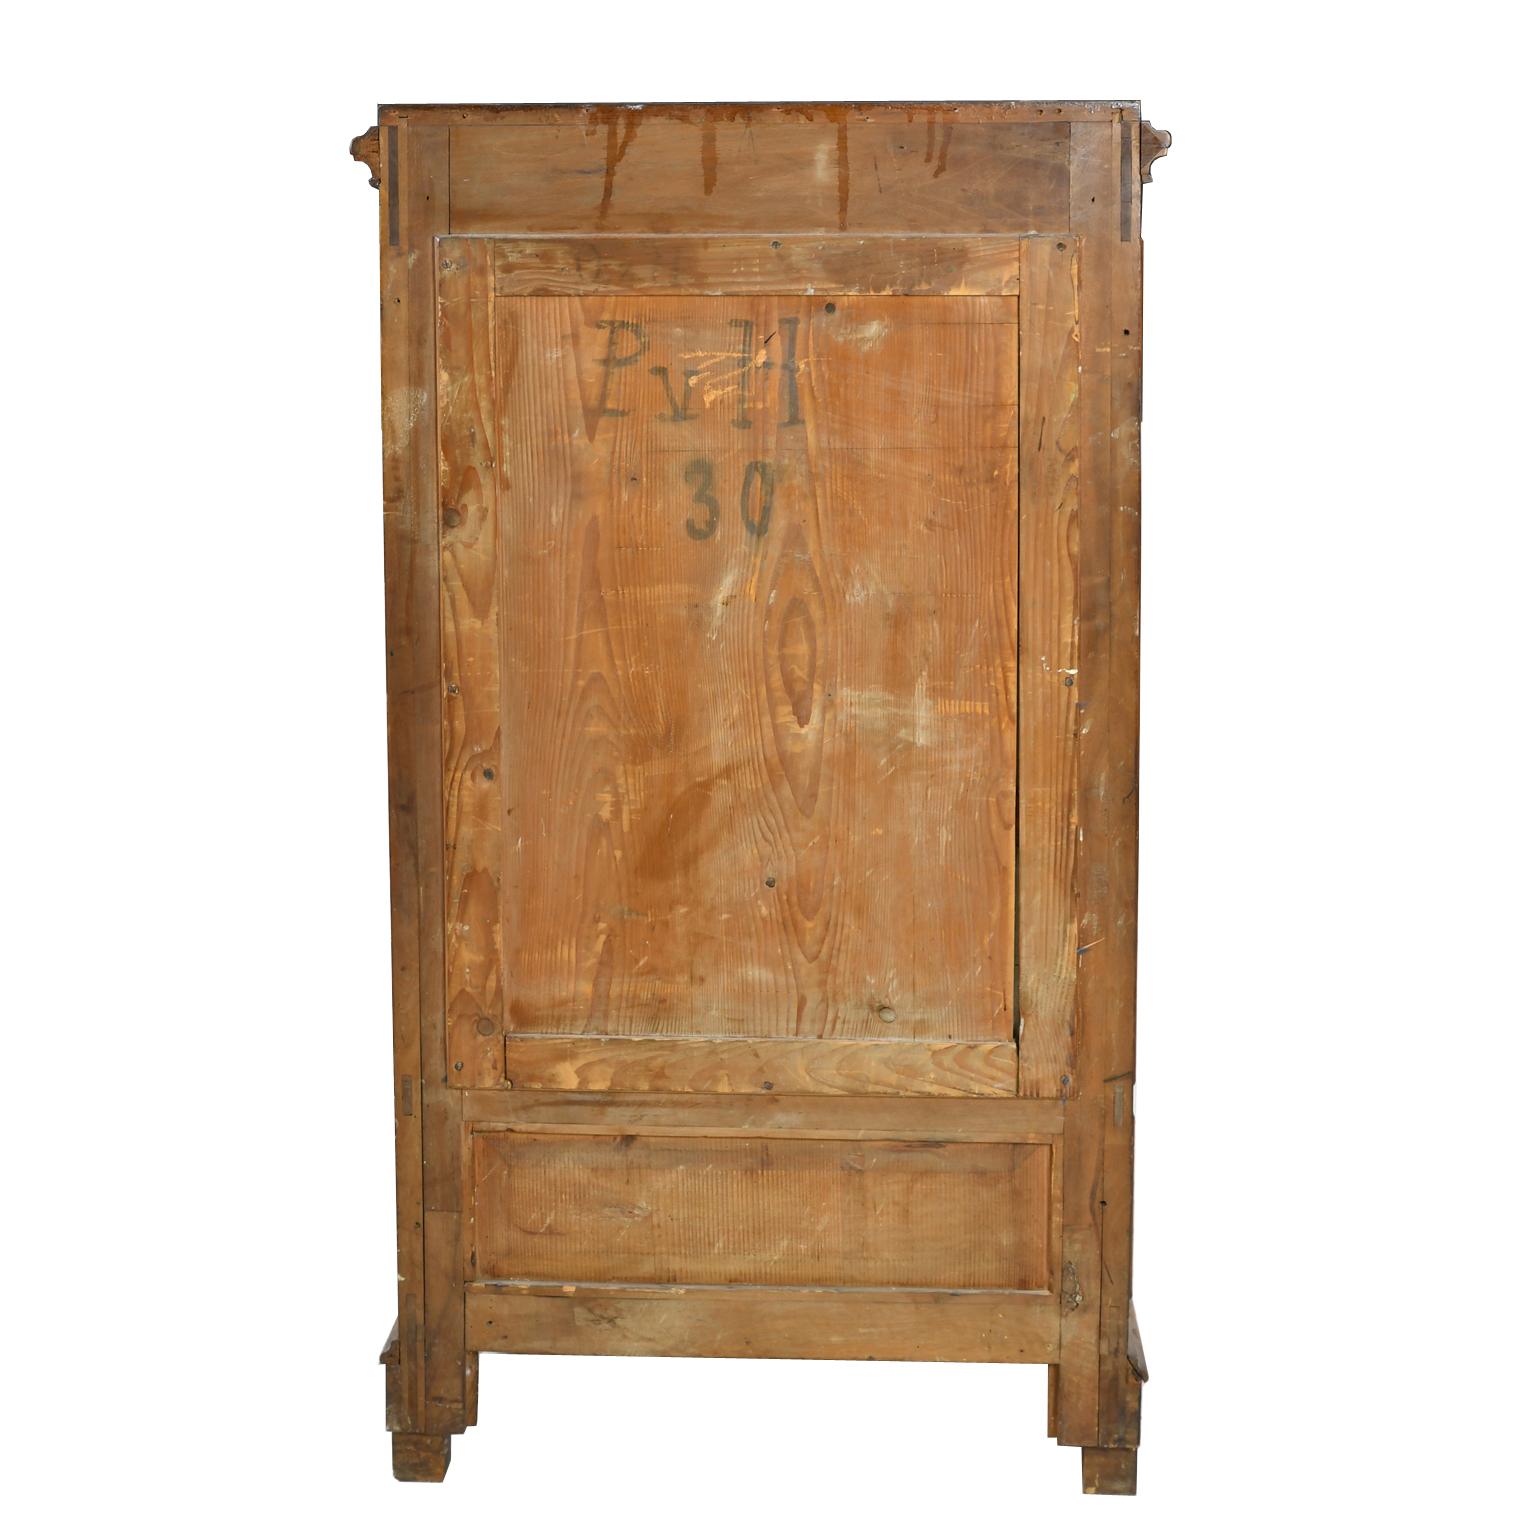 Hand-Crafted Small Antique French Louis Philippe Bookcase/Vitrine in Walnut with Glass Panels